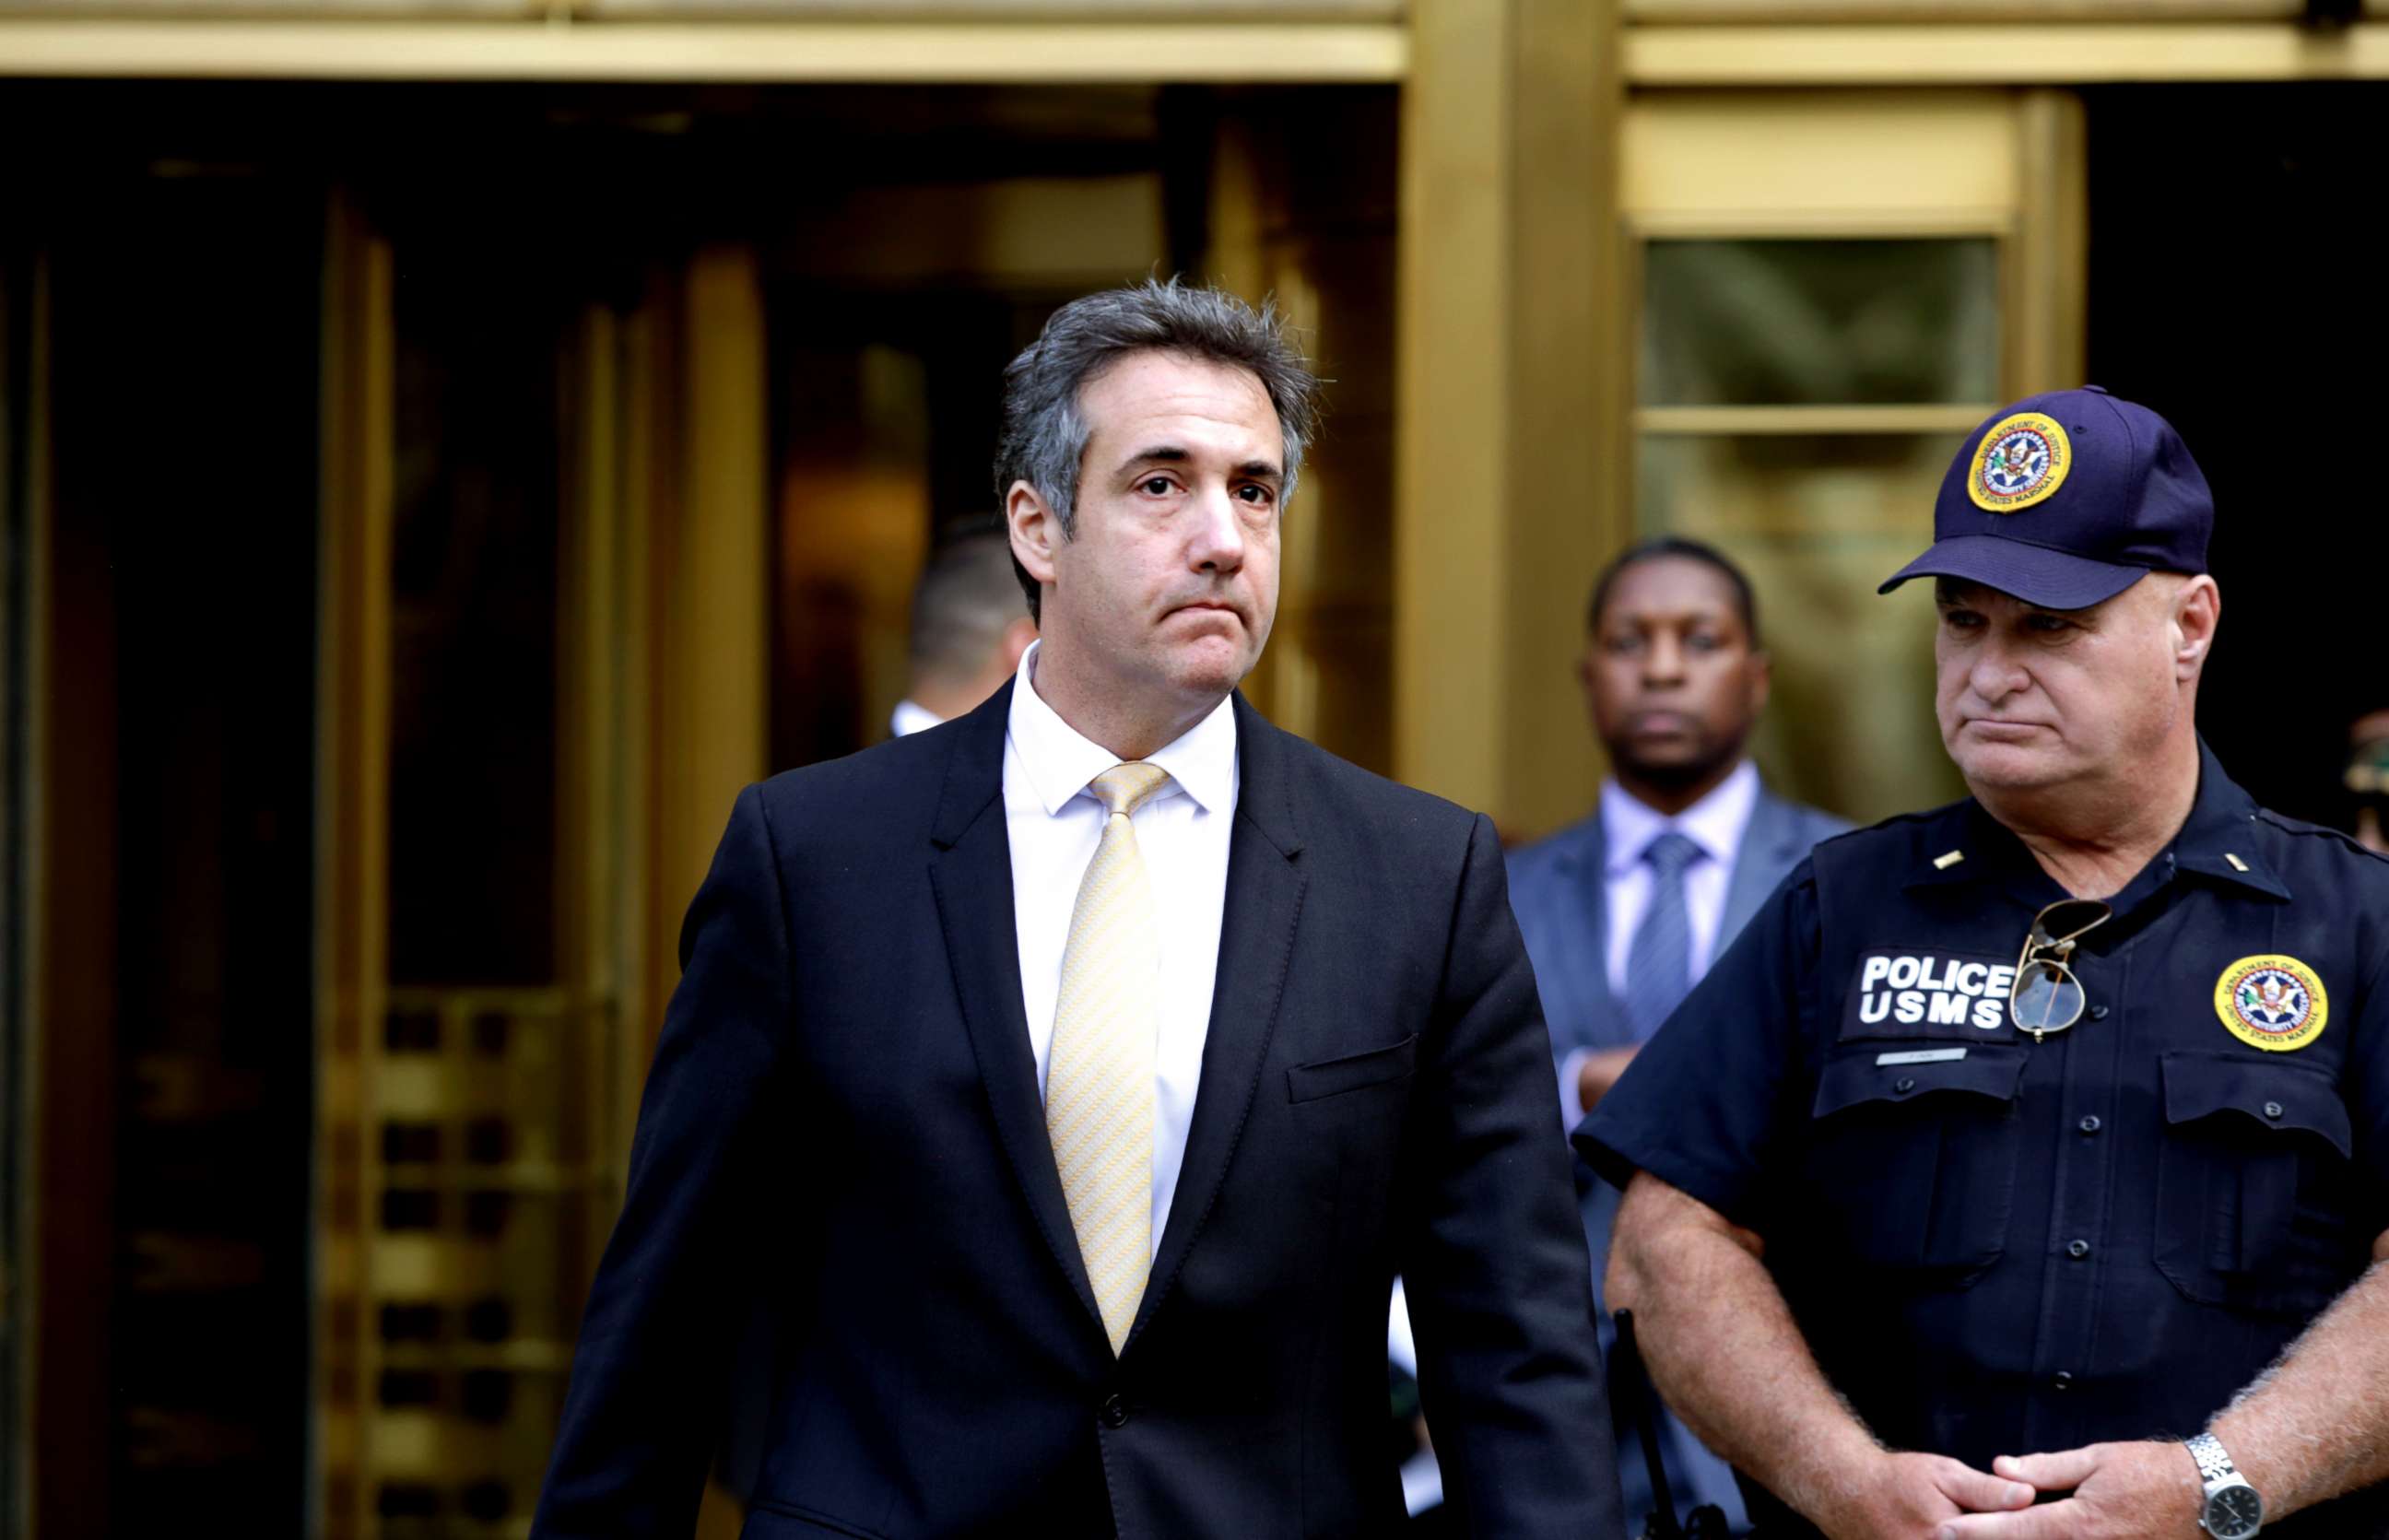 PHOTO: Michael Cohen, the former lawyer to President Donald Trump, exits the Federal Courthouse, Aug. 21, 2018, in New York City.